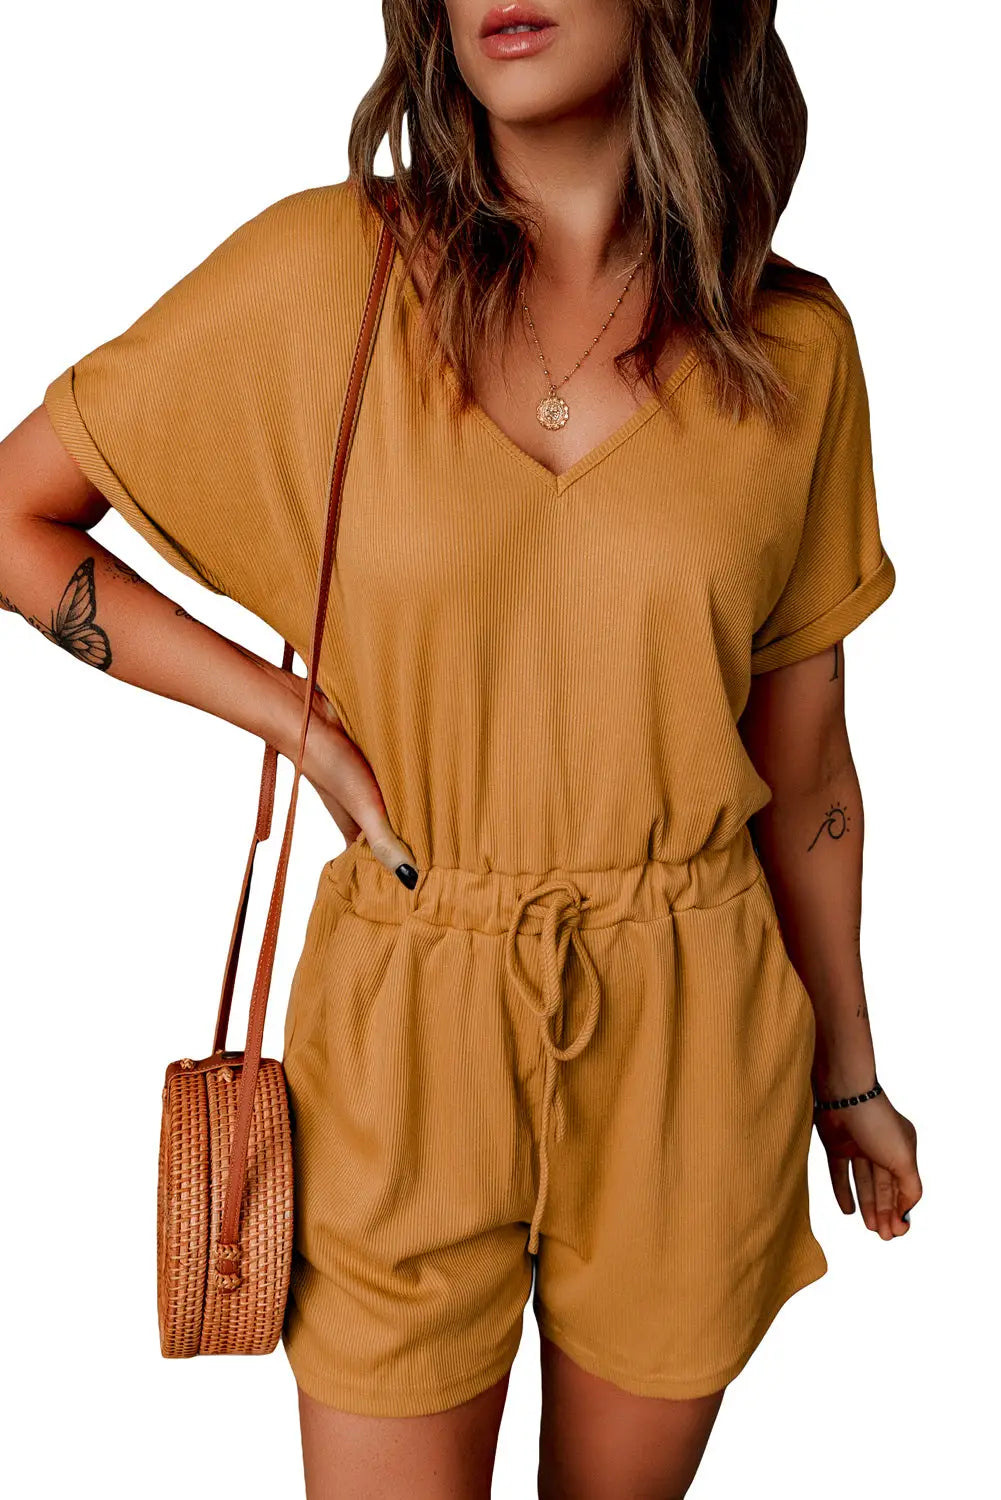 Brown pocketed knit romper - xl / 95% polyester + 5% spandex - jumpsuits & rompers